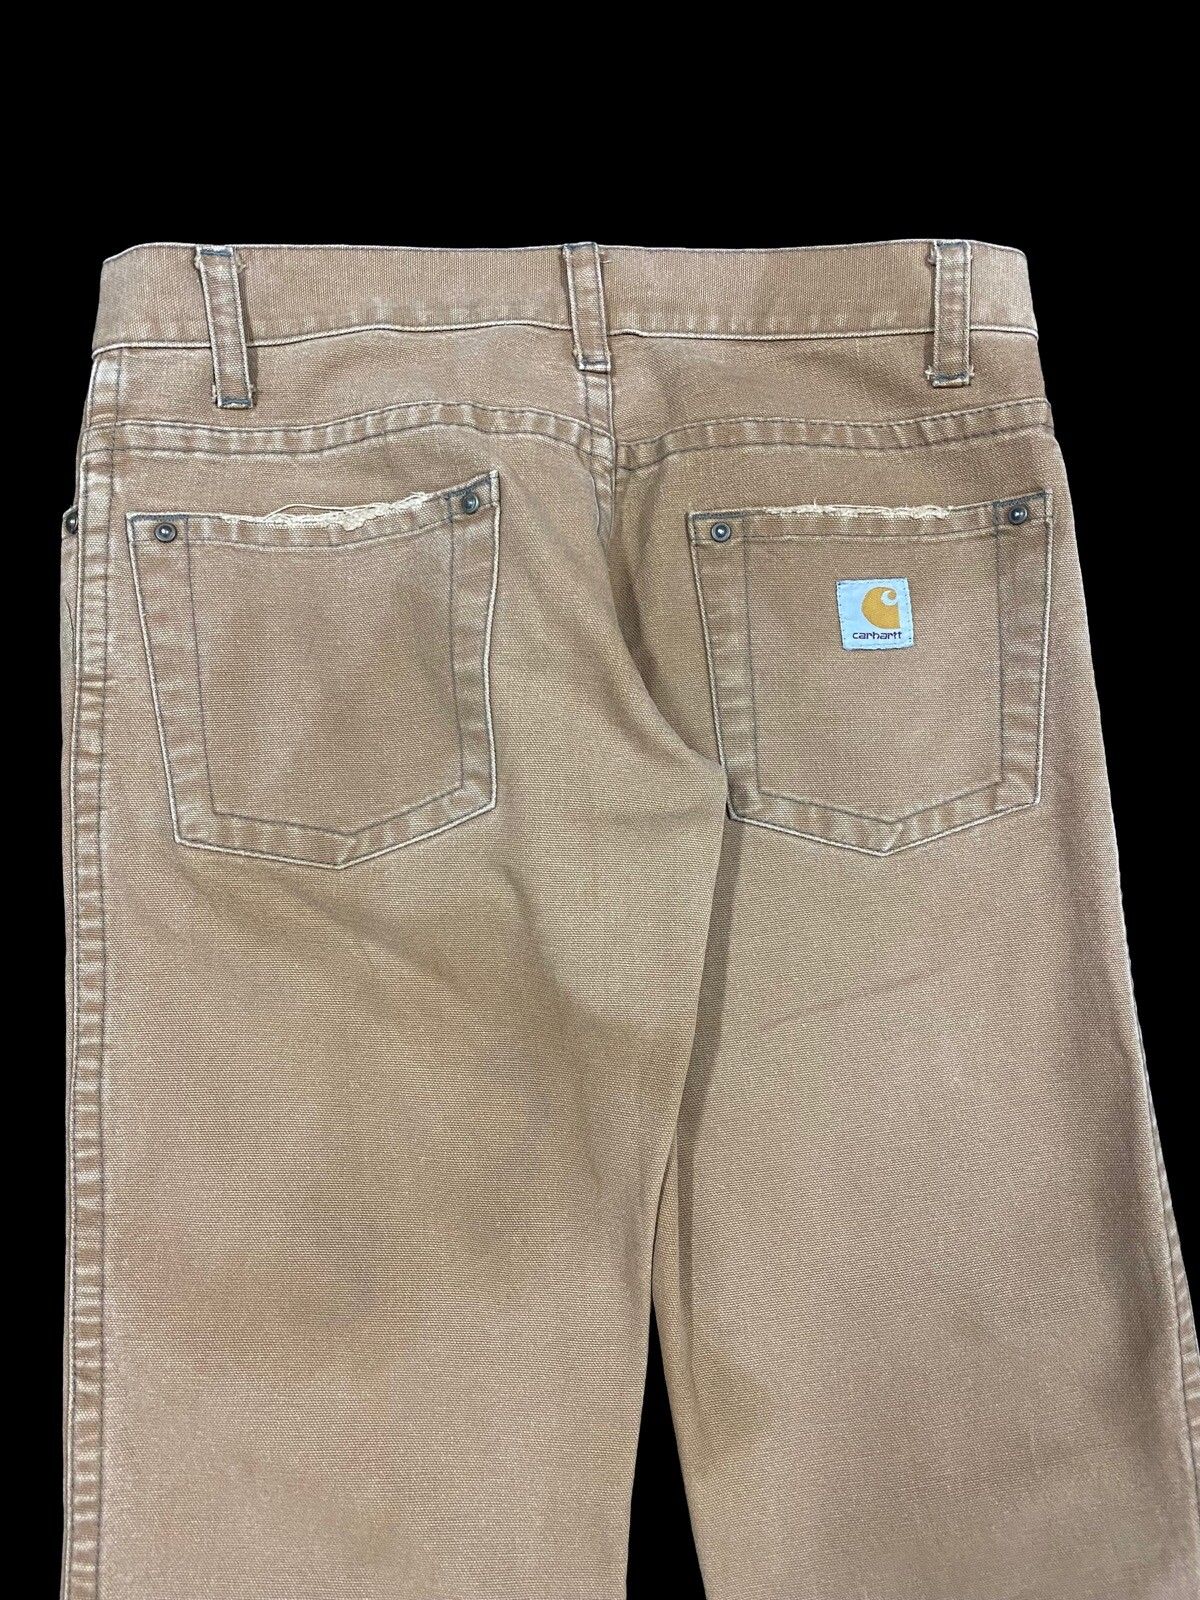 Vtg🔥Carhartt Duck Canvas Jeans Made In Tunisia - 8